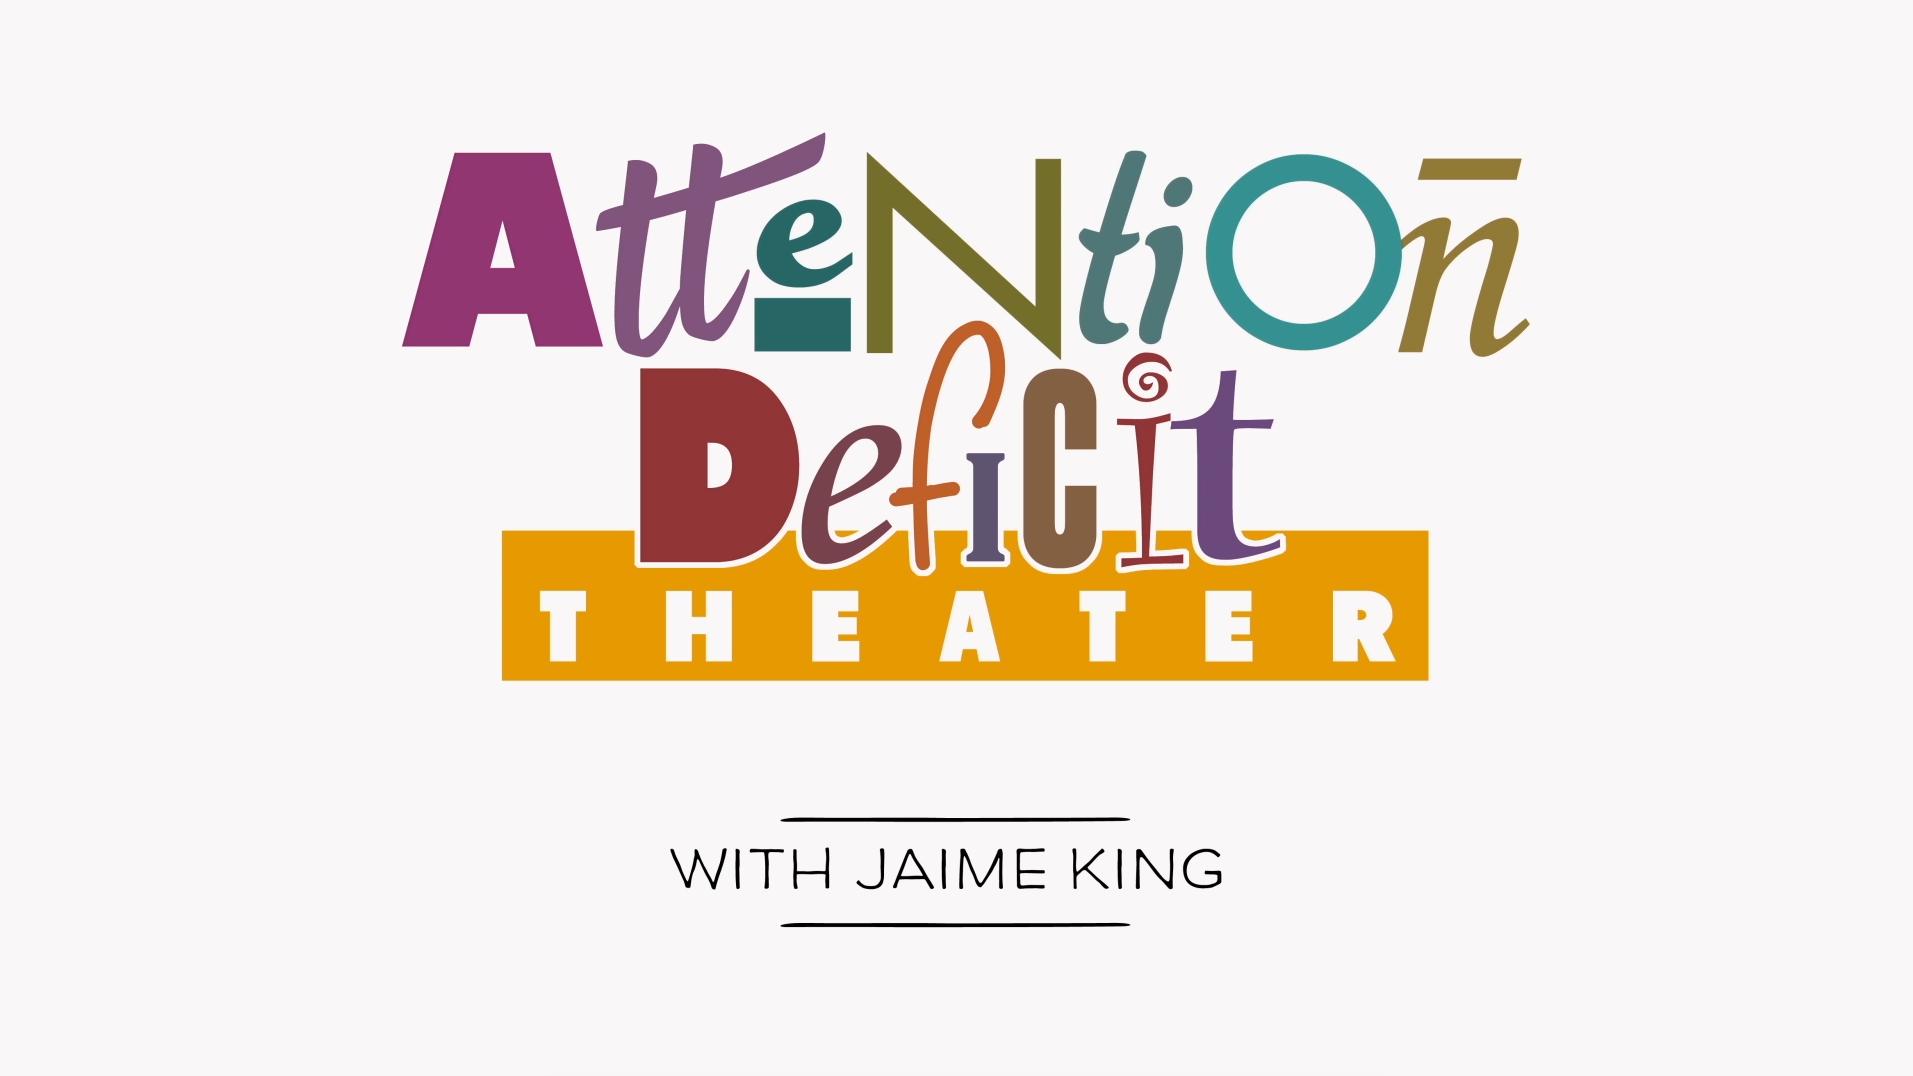 Attention Deficit Theater